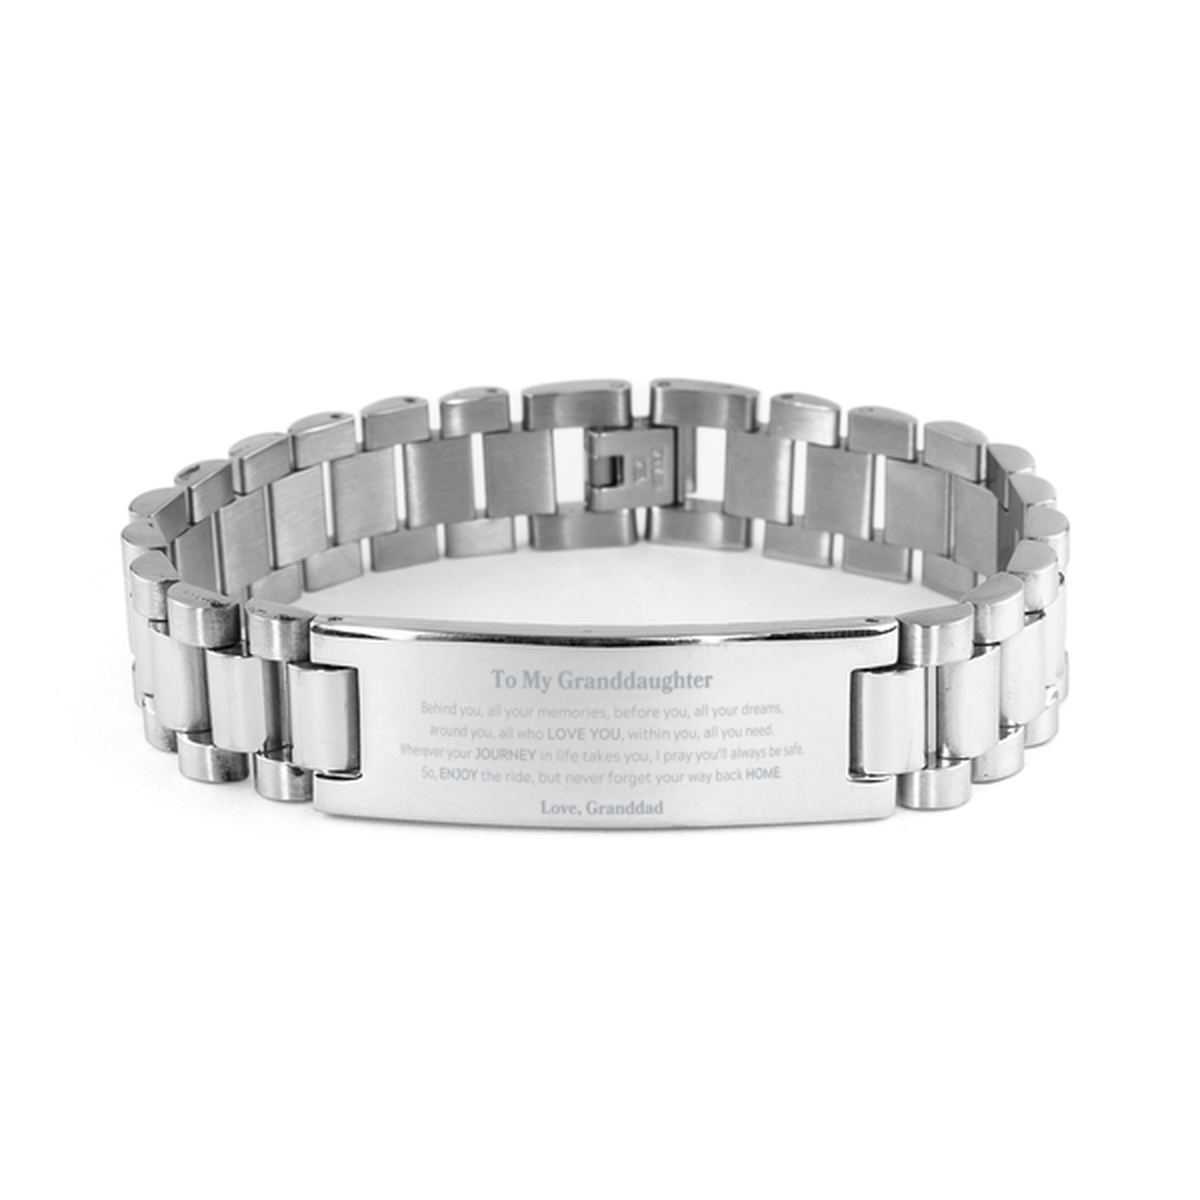 To My Granddaughter Graduation Gifts from Granddad, Granddaughter Ladder Stainless Steel Bracelet Christmas Birthday Gifts for Granddaughter Behind you, all your memories, before you, all your dreams. Love, Granddad